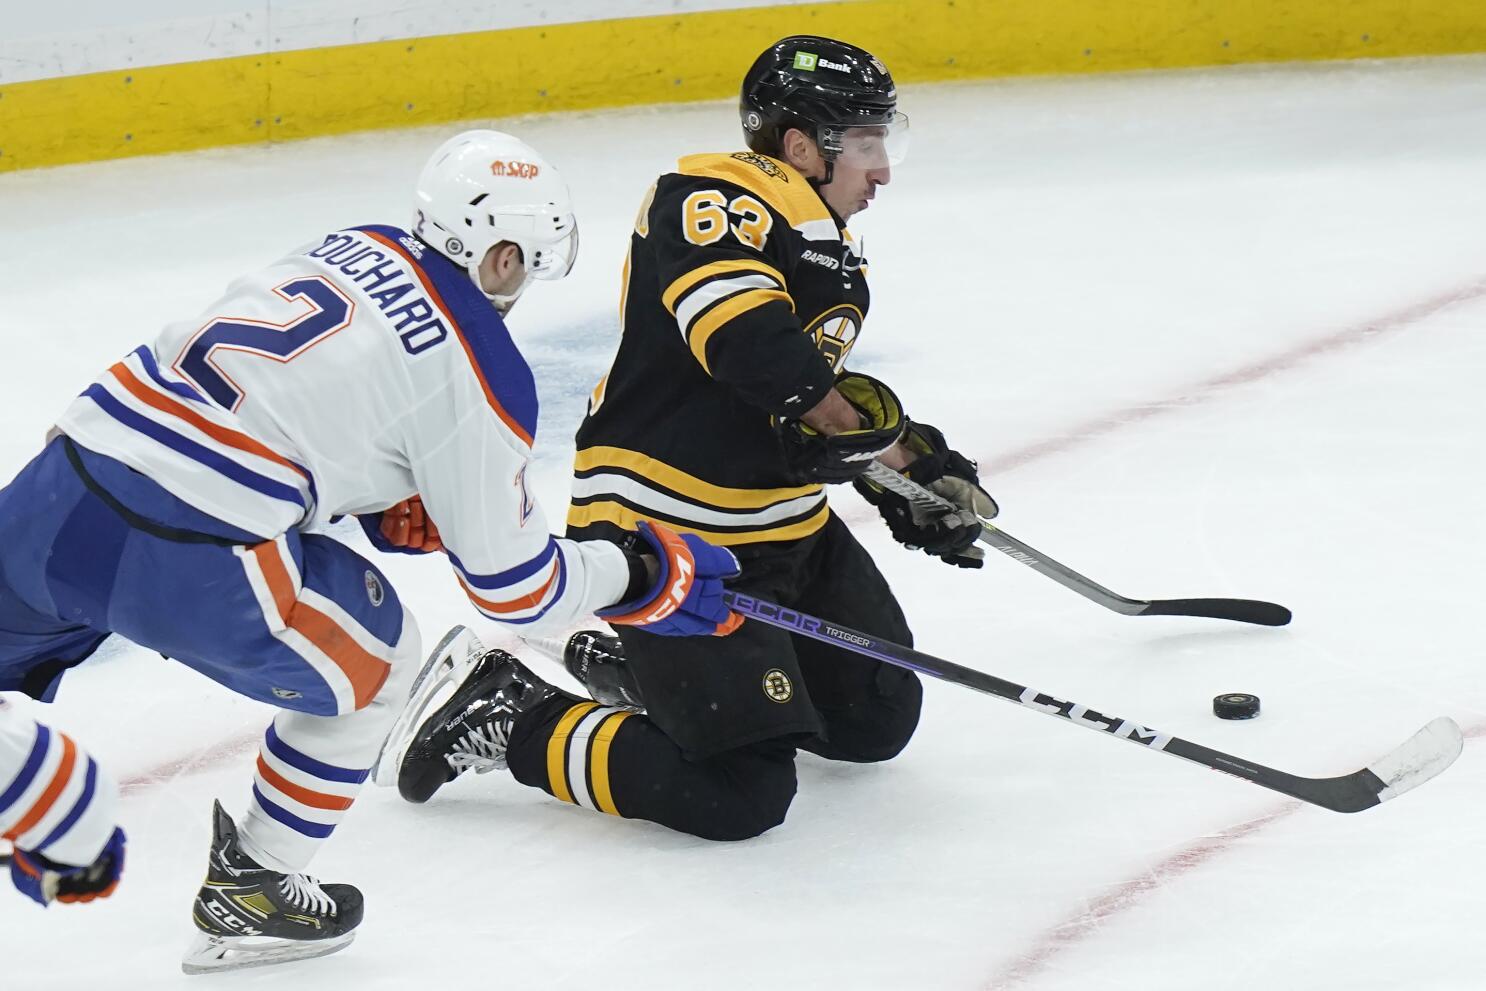 Oilers go for 3rd straight win against Chicago